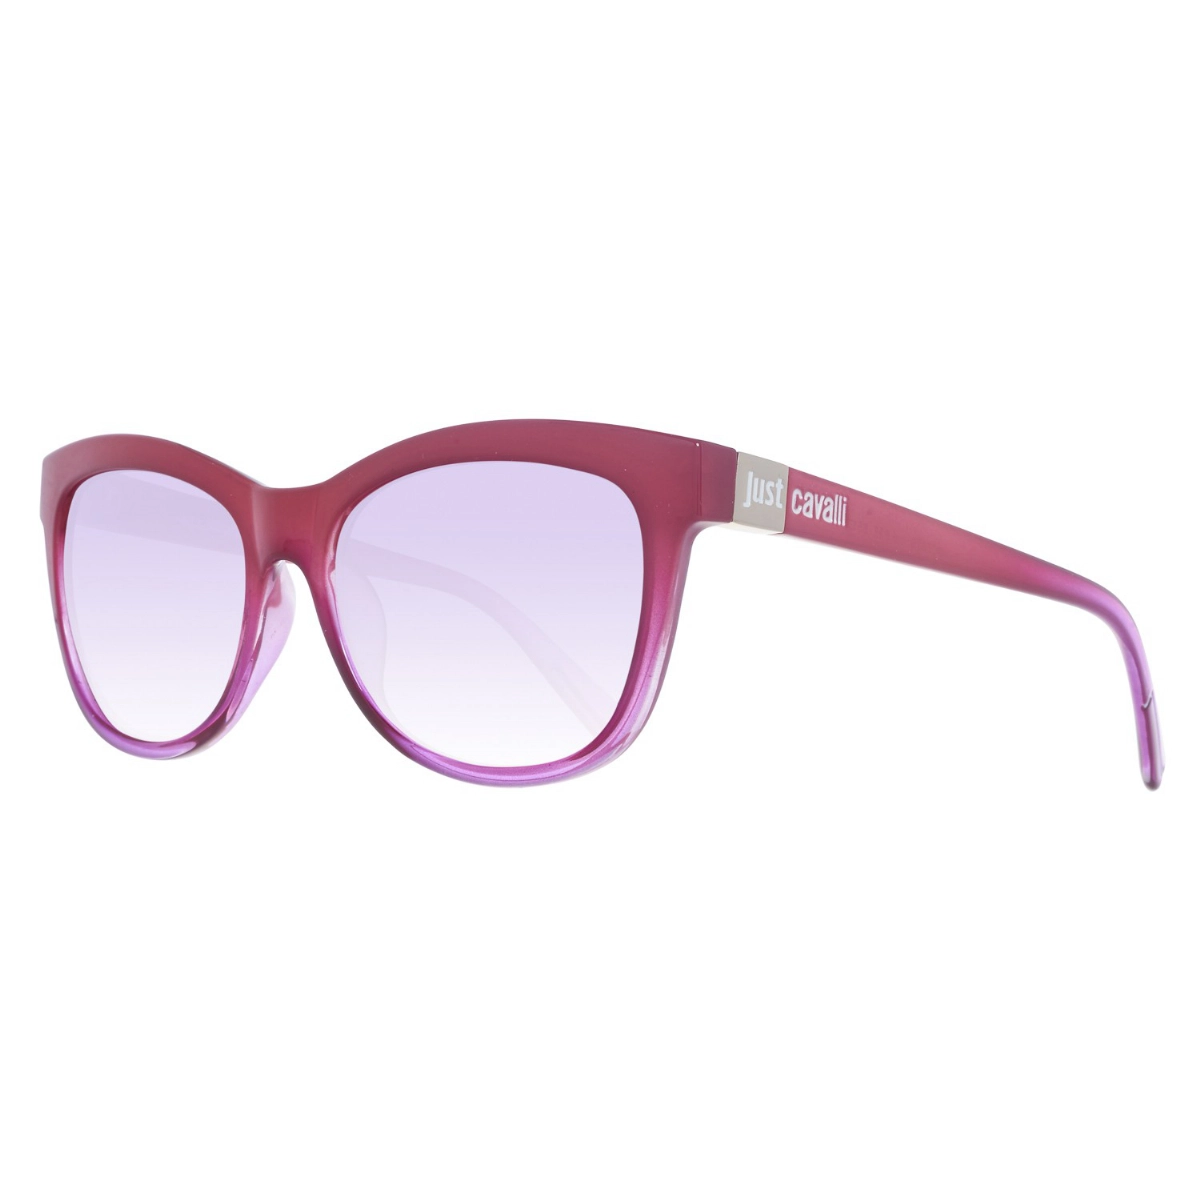 GLASSES FOR WOMAN JUST CAVALLI JC567S-5583Z